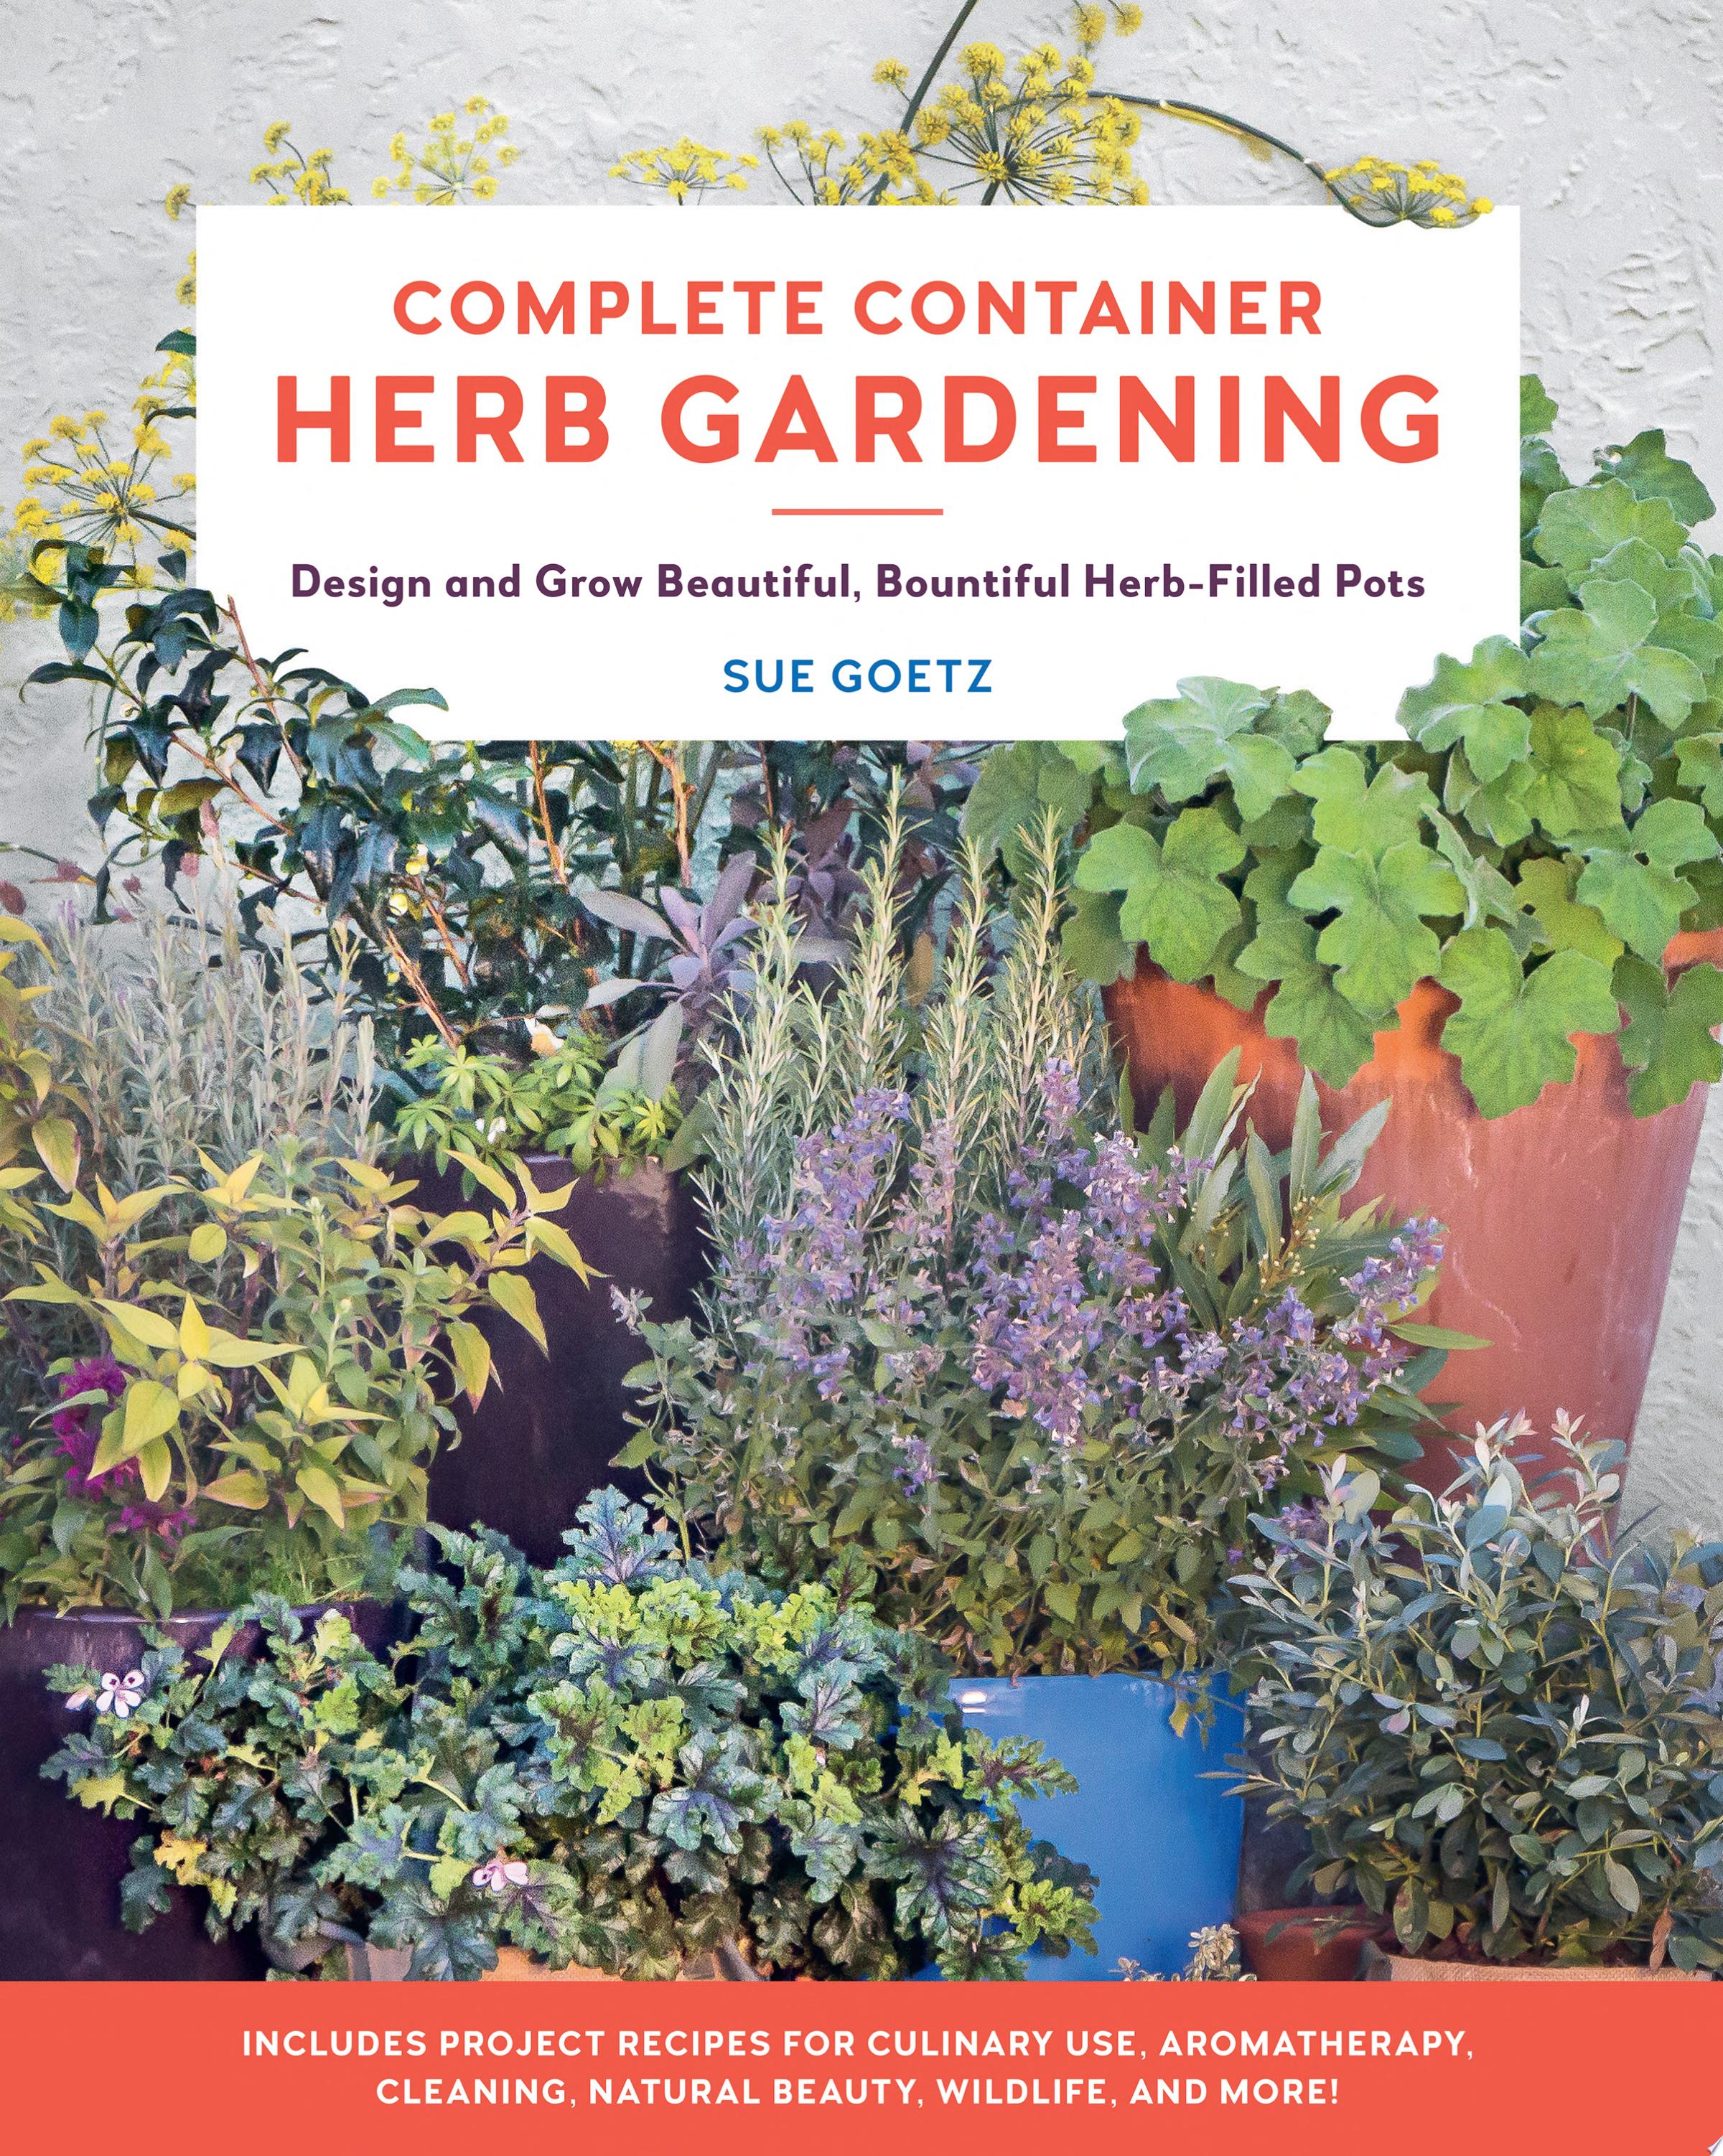 Image for "Complete Container Herb Gardening"